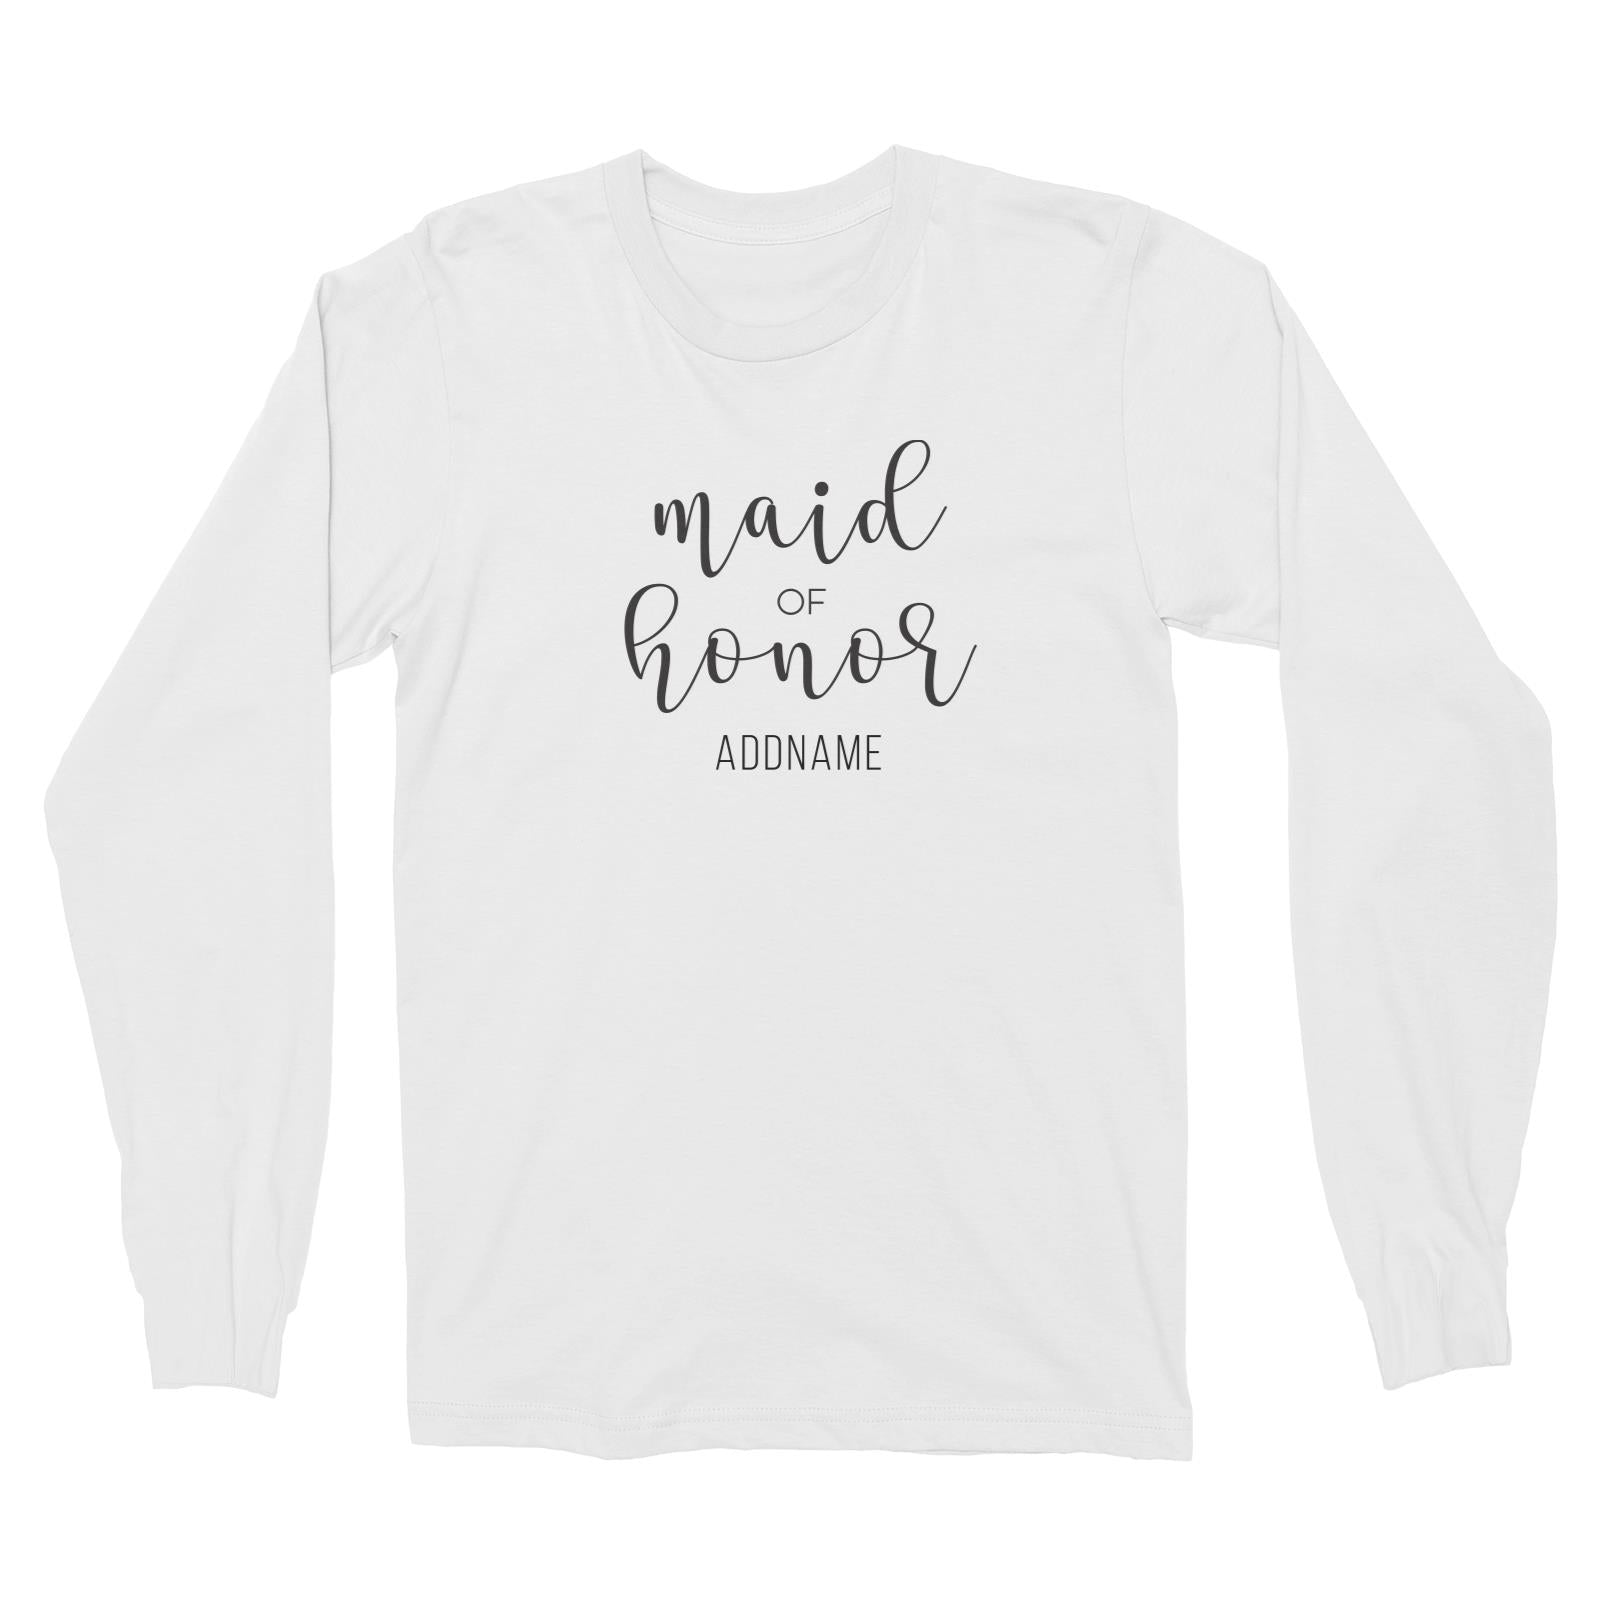 Bridesmaid Calligraphy Maid Of Honour Subtle Addname Long Sleeve Unisex T-Shirt